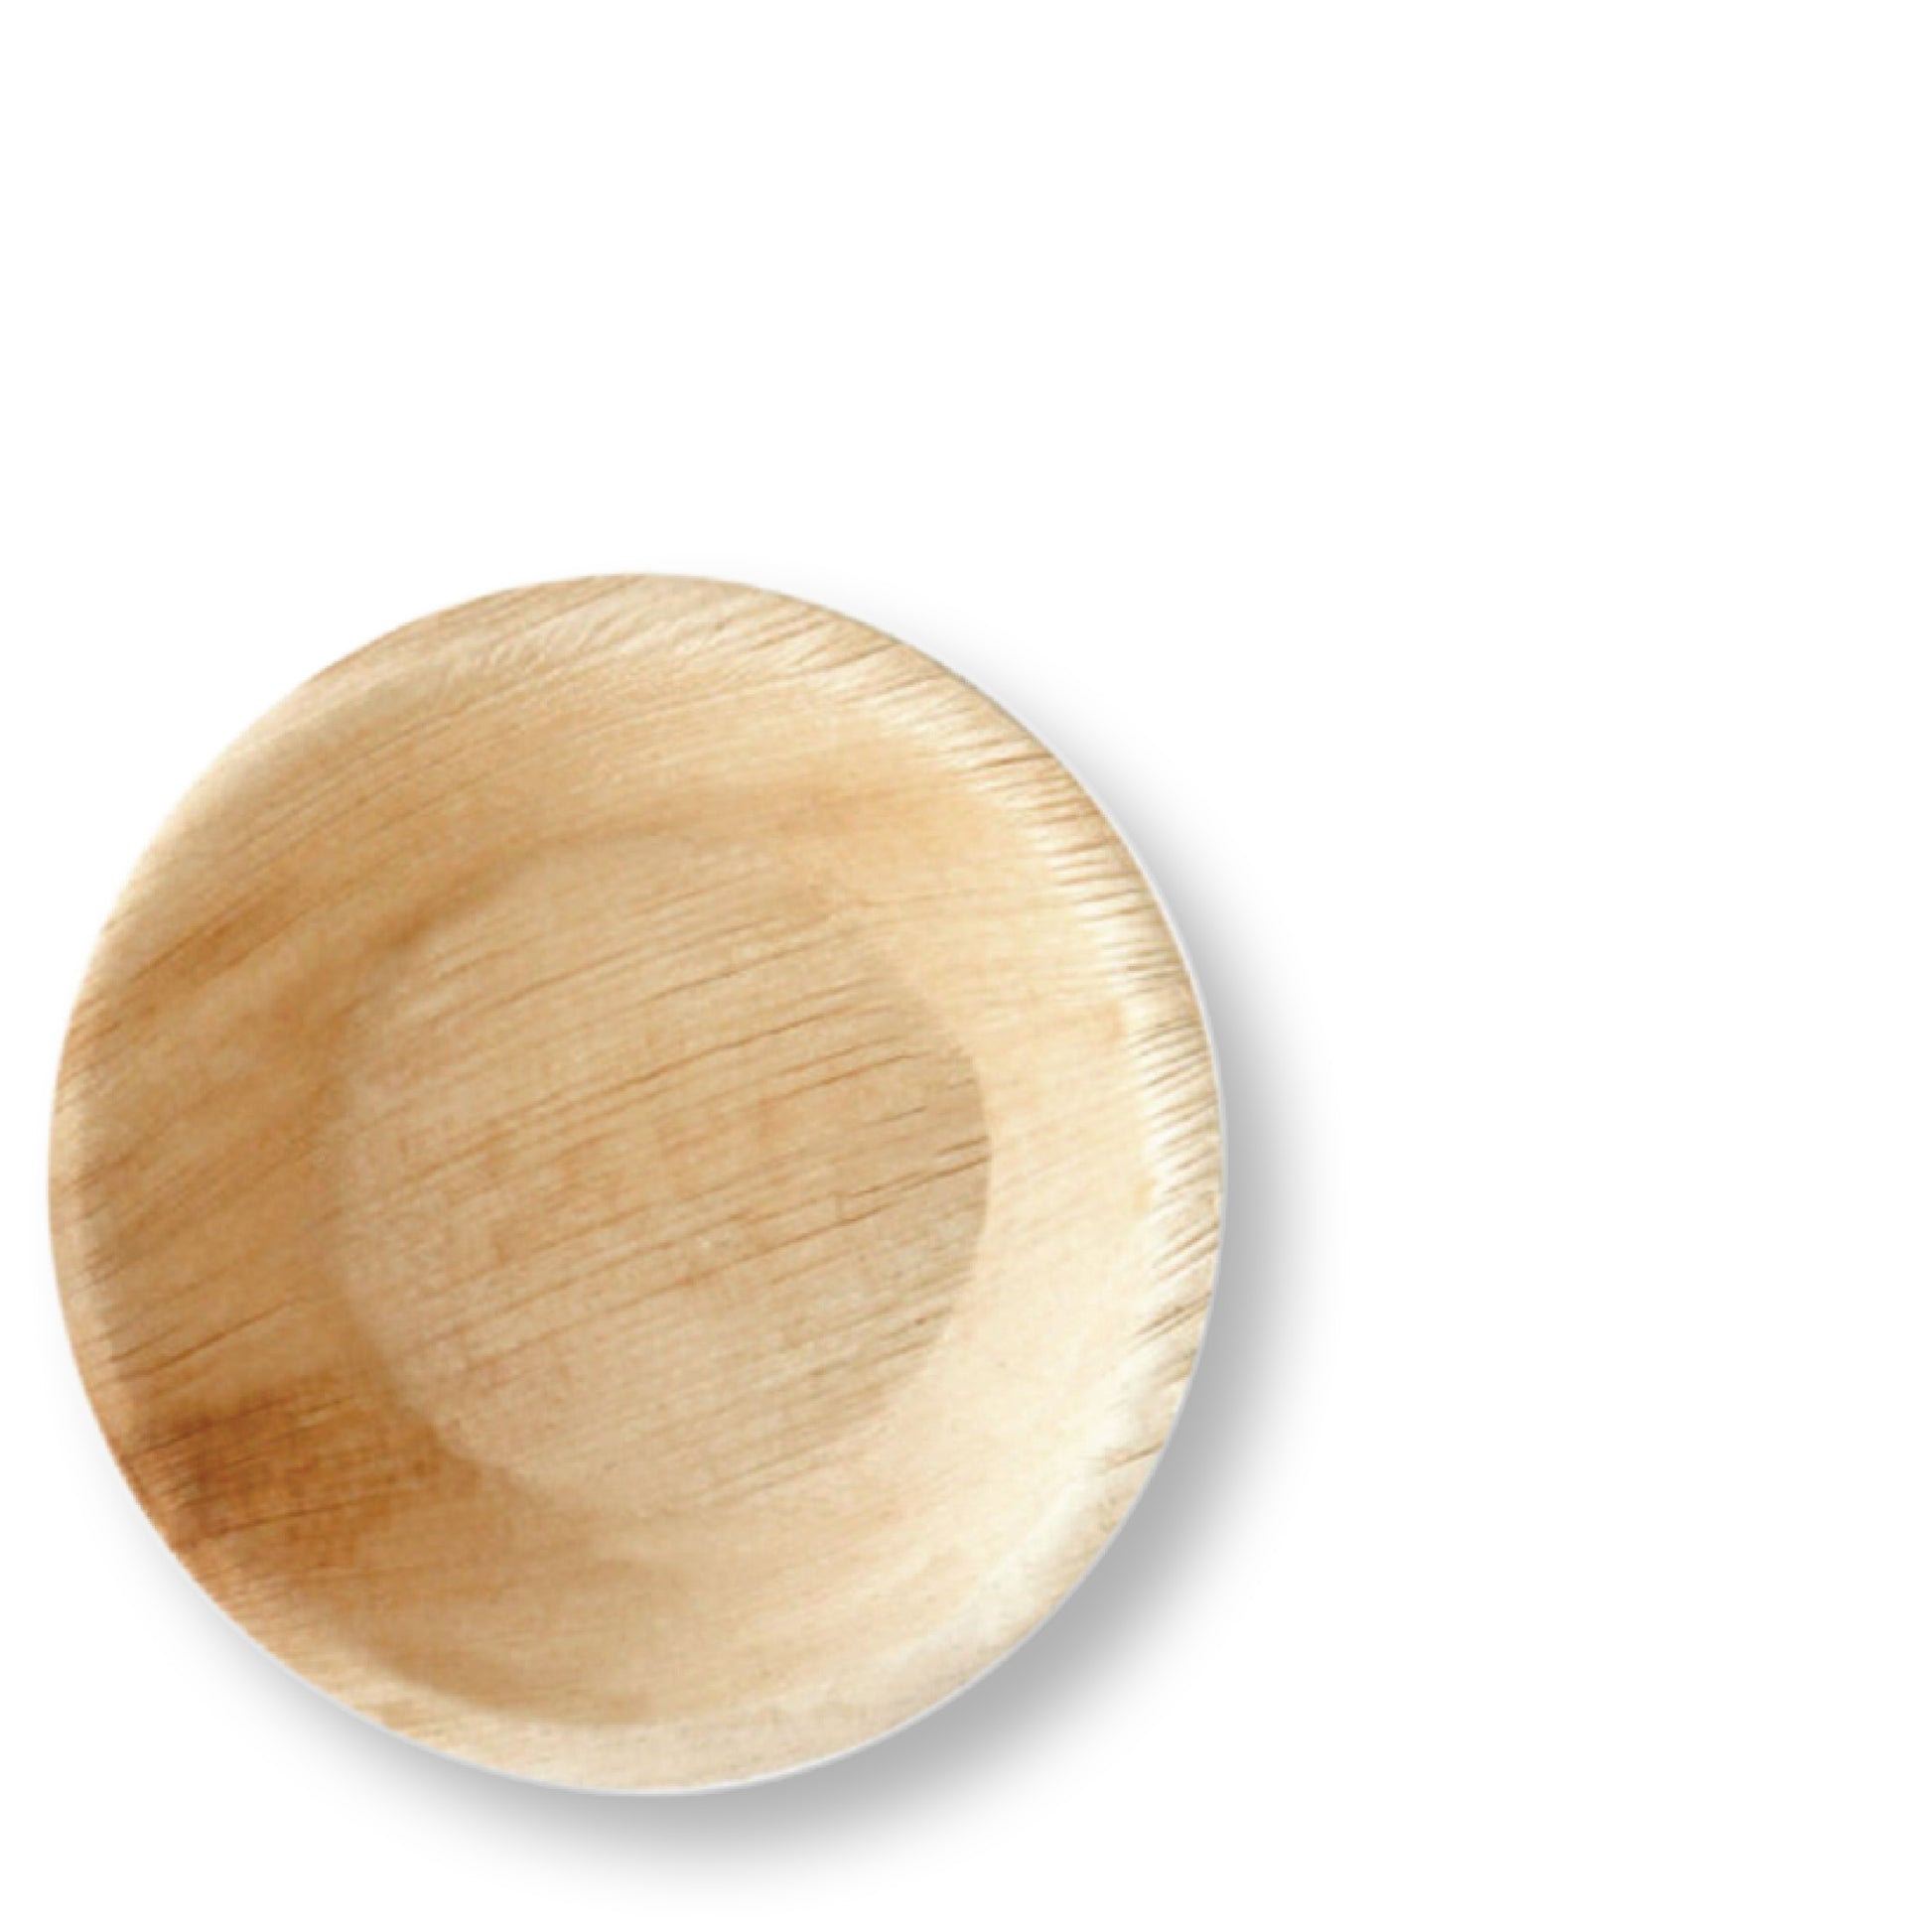 Disposable Stylish Palm Leaf Plates are a unique alternative to other disposable tableware on the market. From Palm Leaf lates